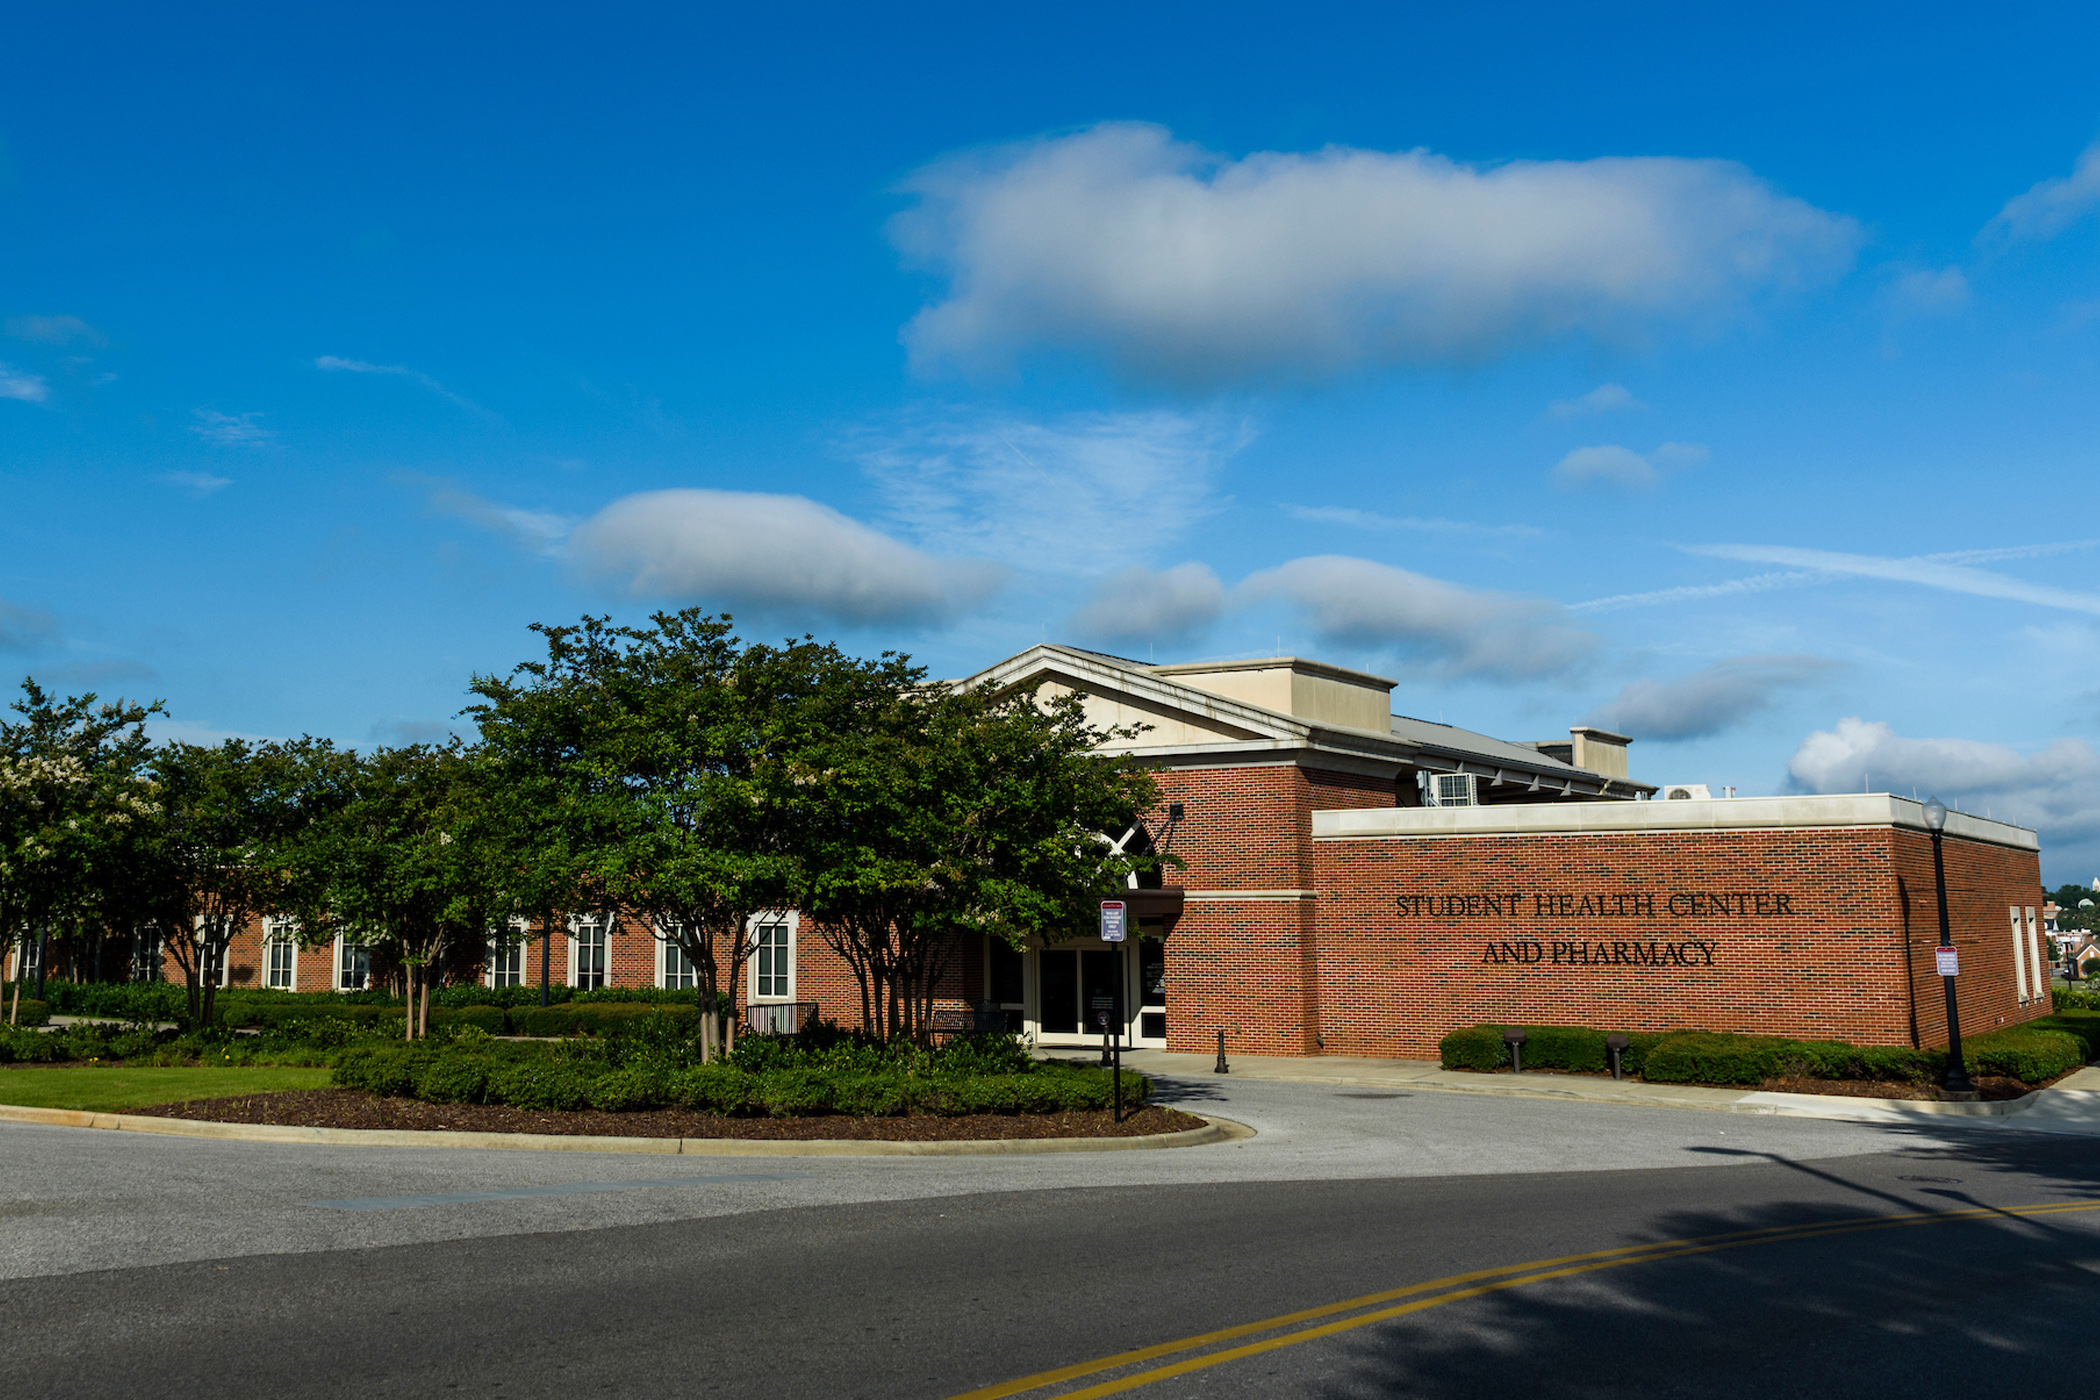 The front exterior of the Student Health Center before renovations start